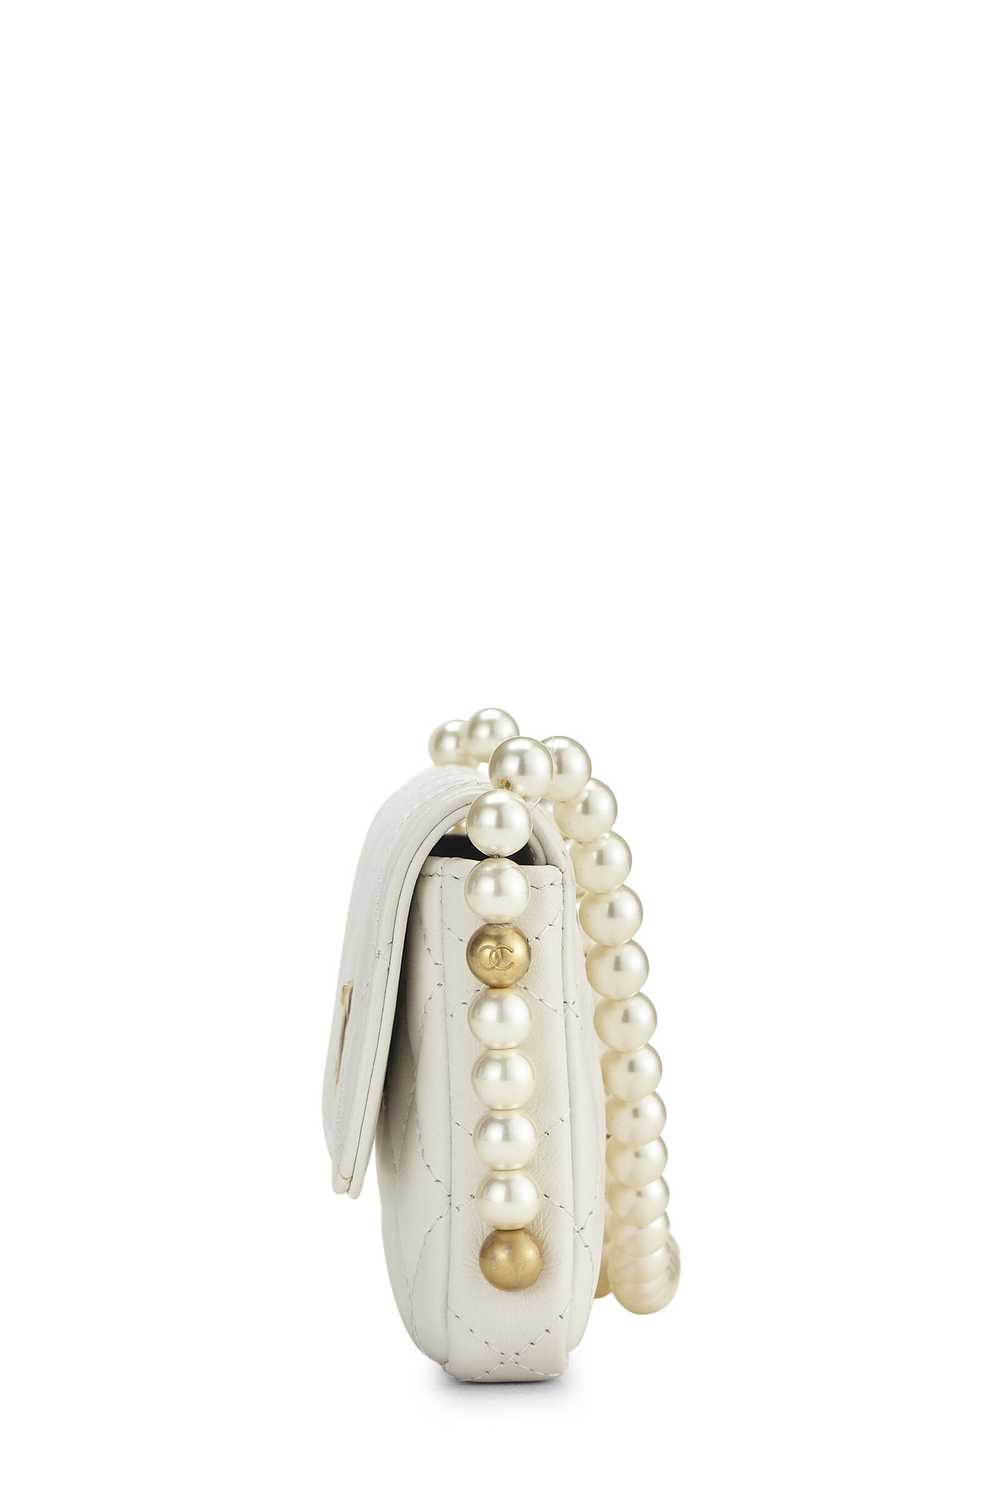 White Calfskin About Pearls Card Holder With Chain - image 3